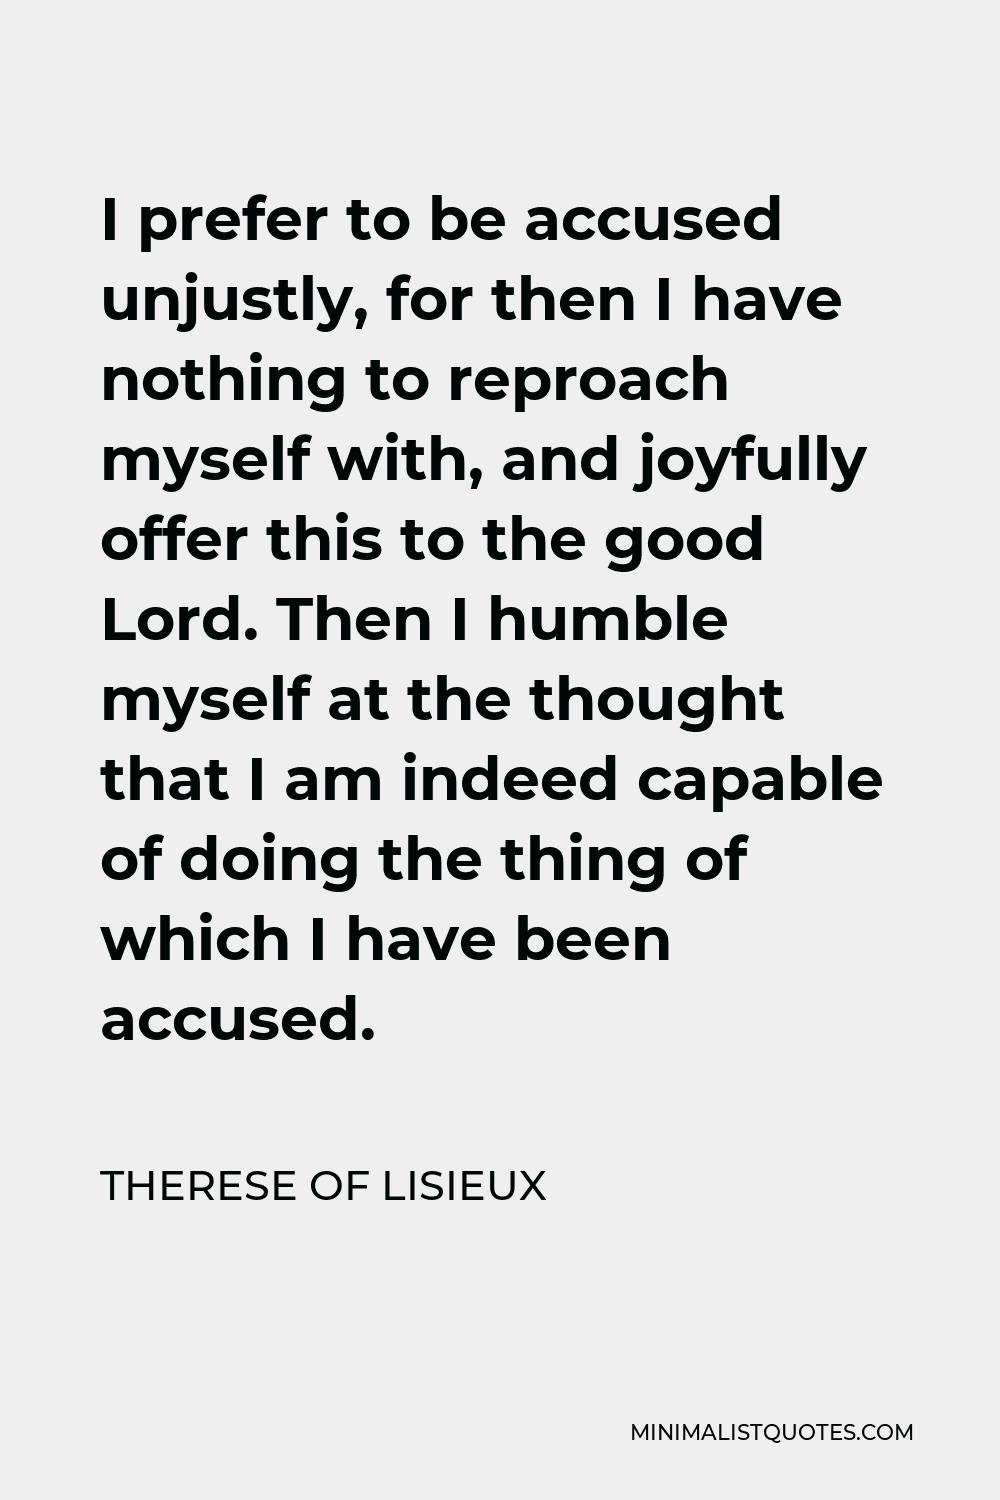 Therese of Lisieux Quote - I prefer to be accused unjustly, for then I have nothing to reproach myself with, and joyfully offer this to the good Lord. Then I humble myself at the thought that I am indeed capable of doing the thing of which I have been accused.